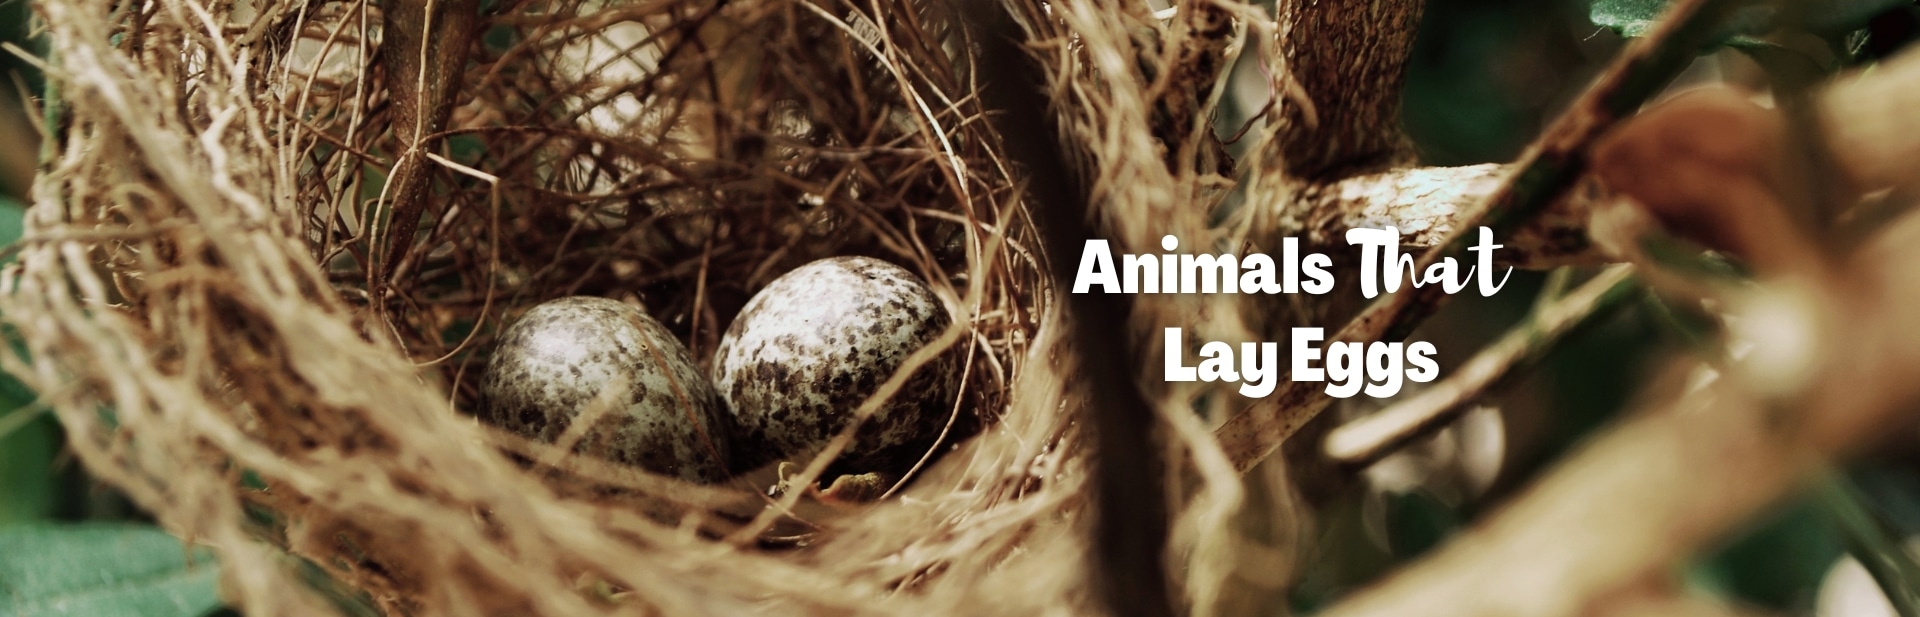 Animals That Lay Eggs: The World’s Most Eggs-ellent Creatures!